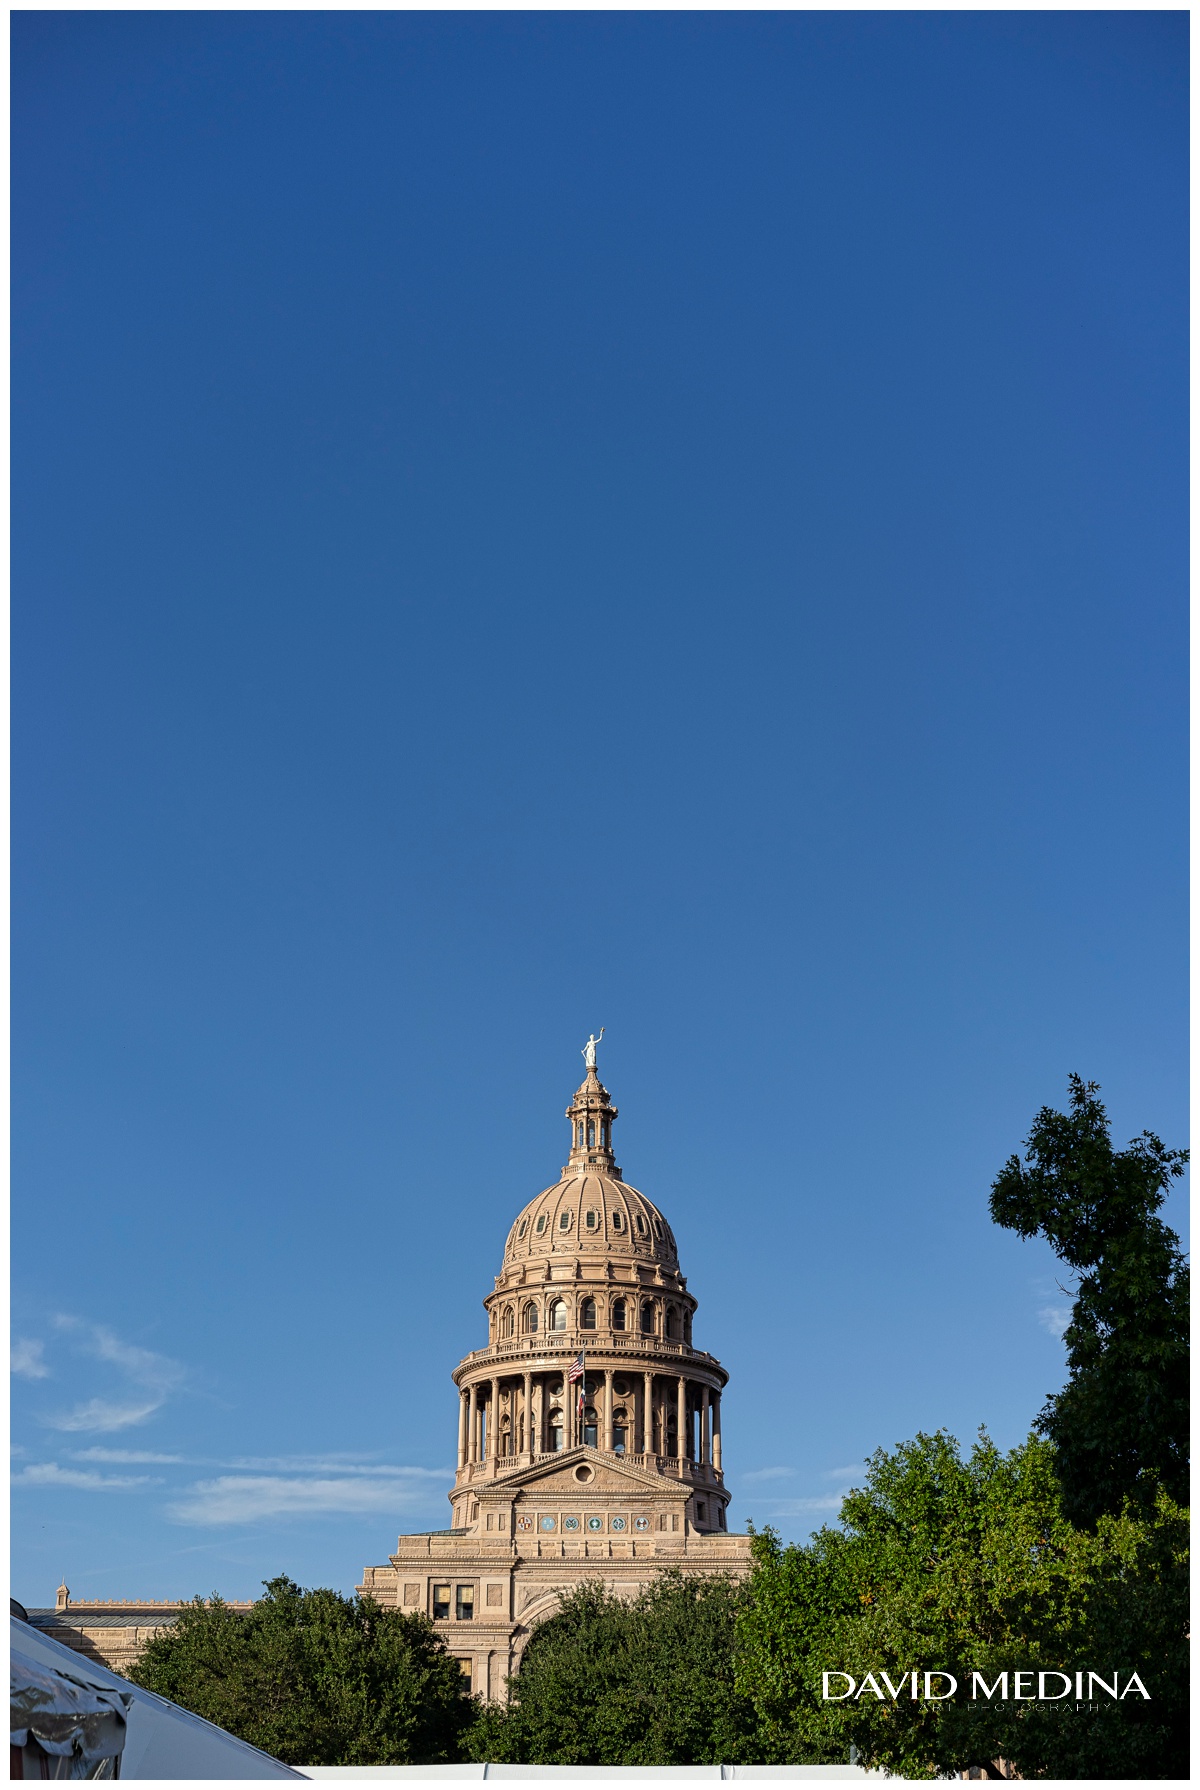 View of Texas State Capitol